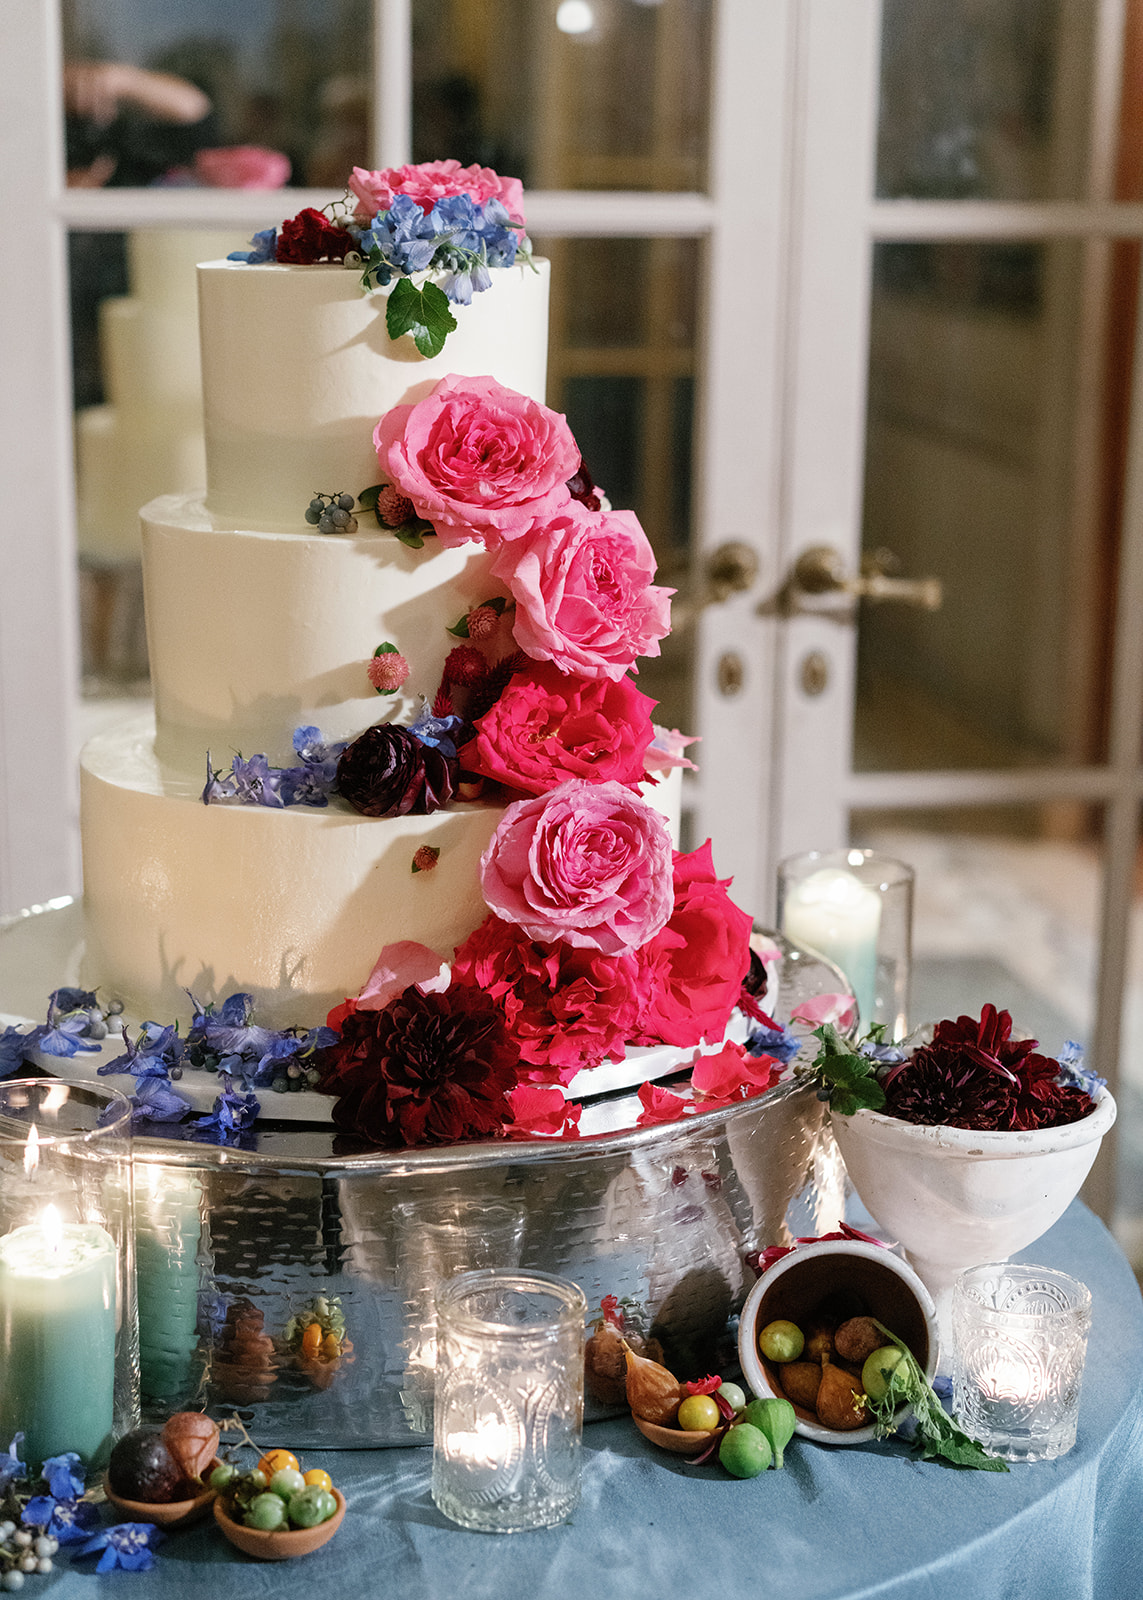 WEDDING CAKE AT RECEPTION AT LARZ ANDERSON HOUSE